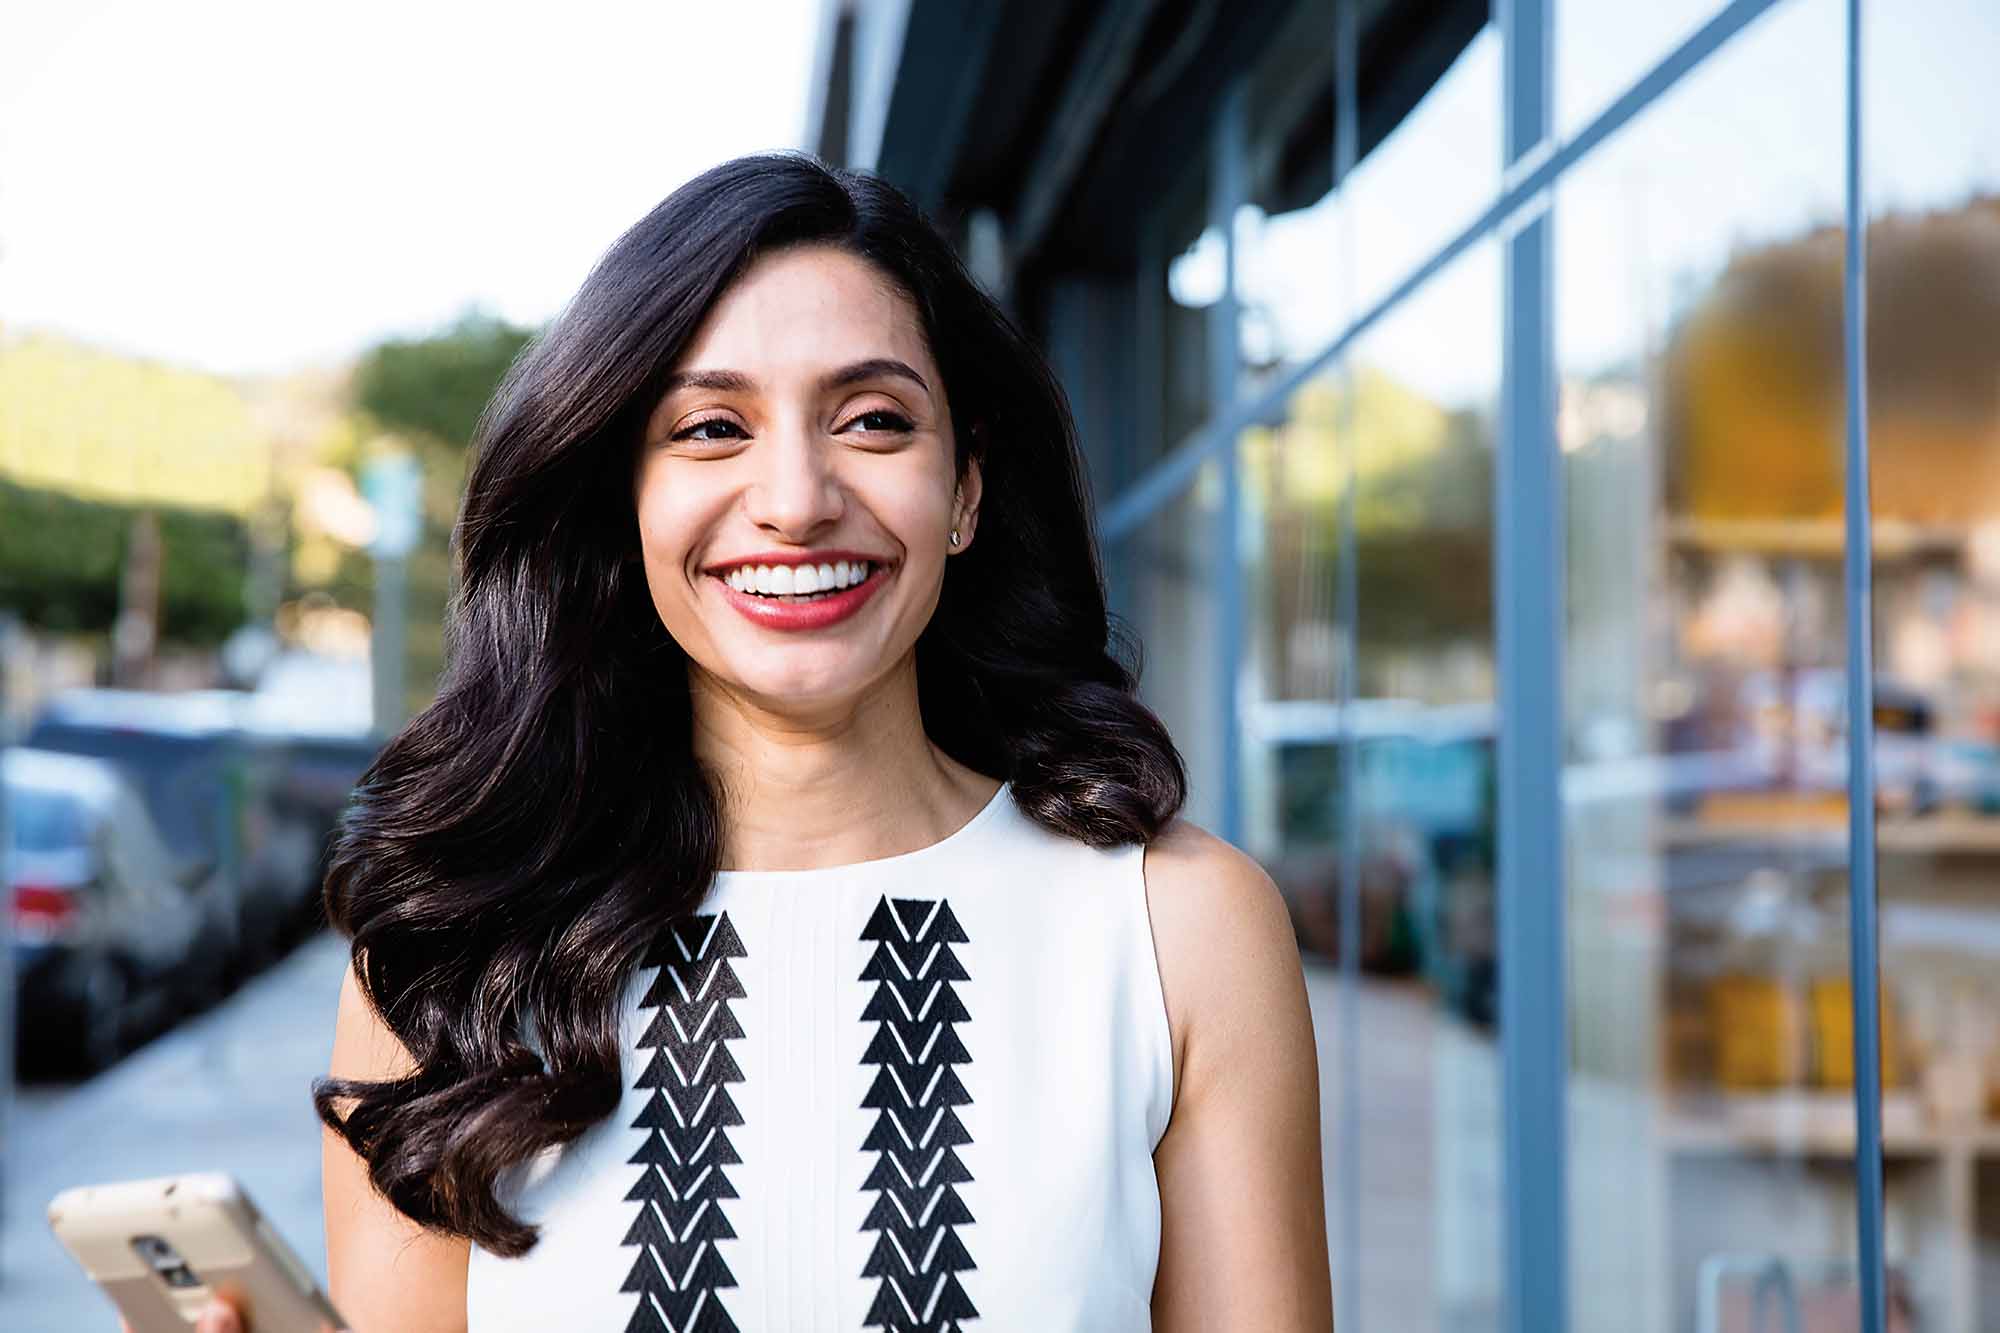 Invisalign confidence: Smiling woman in the city